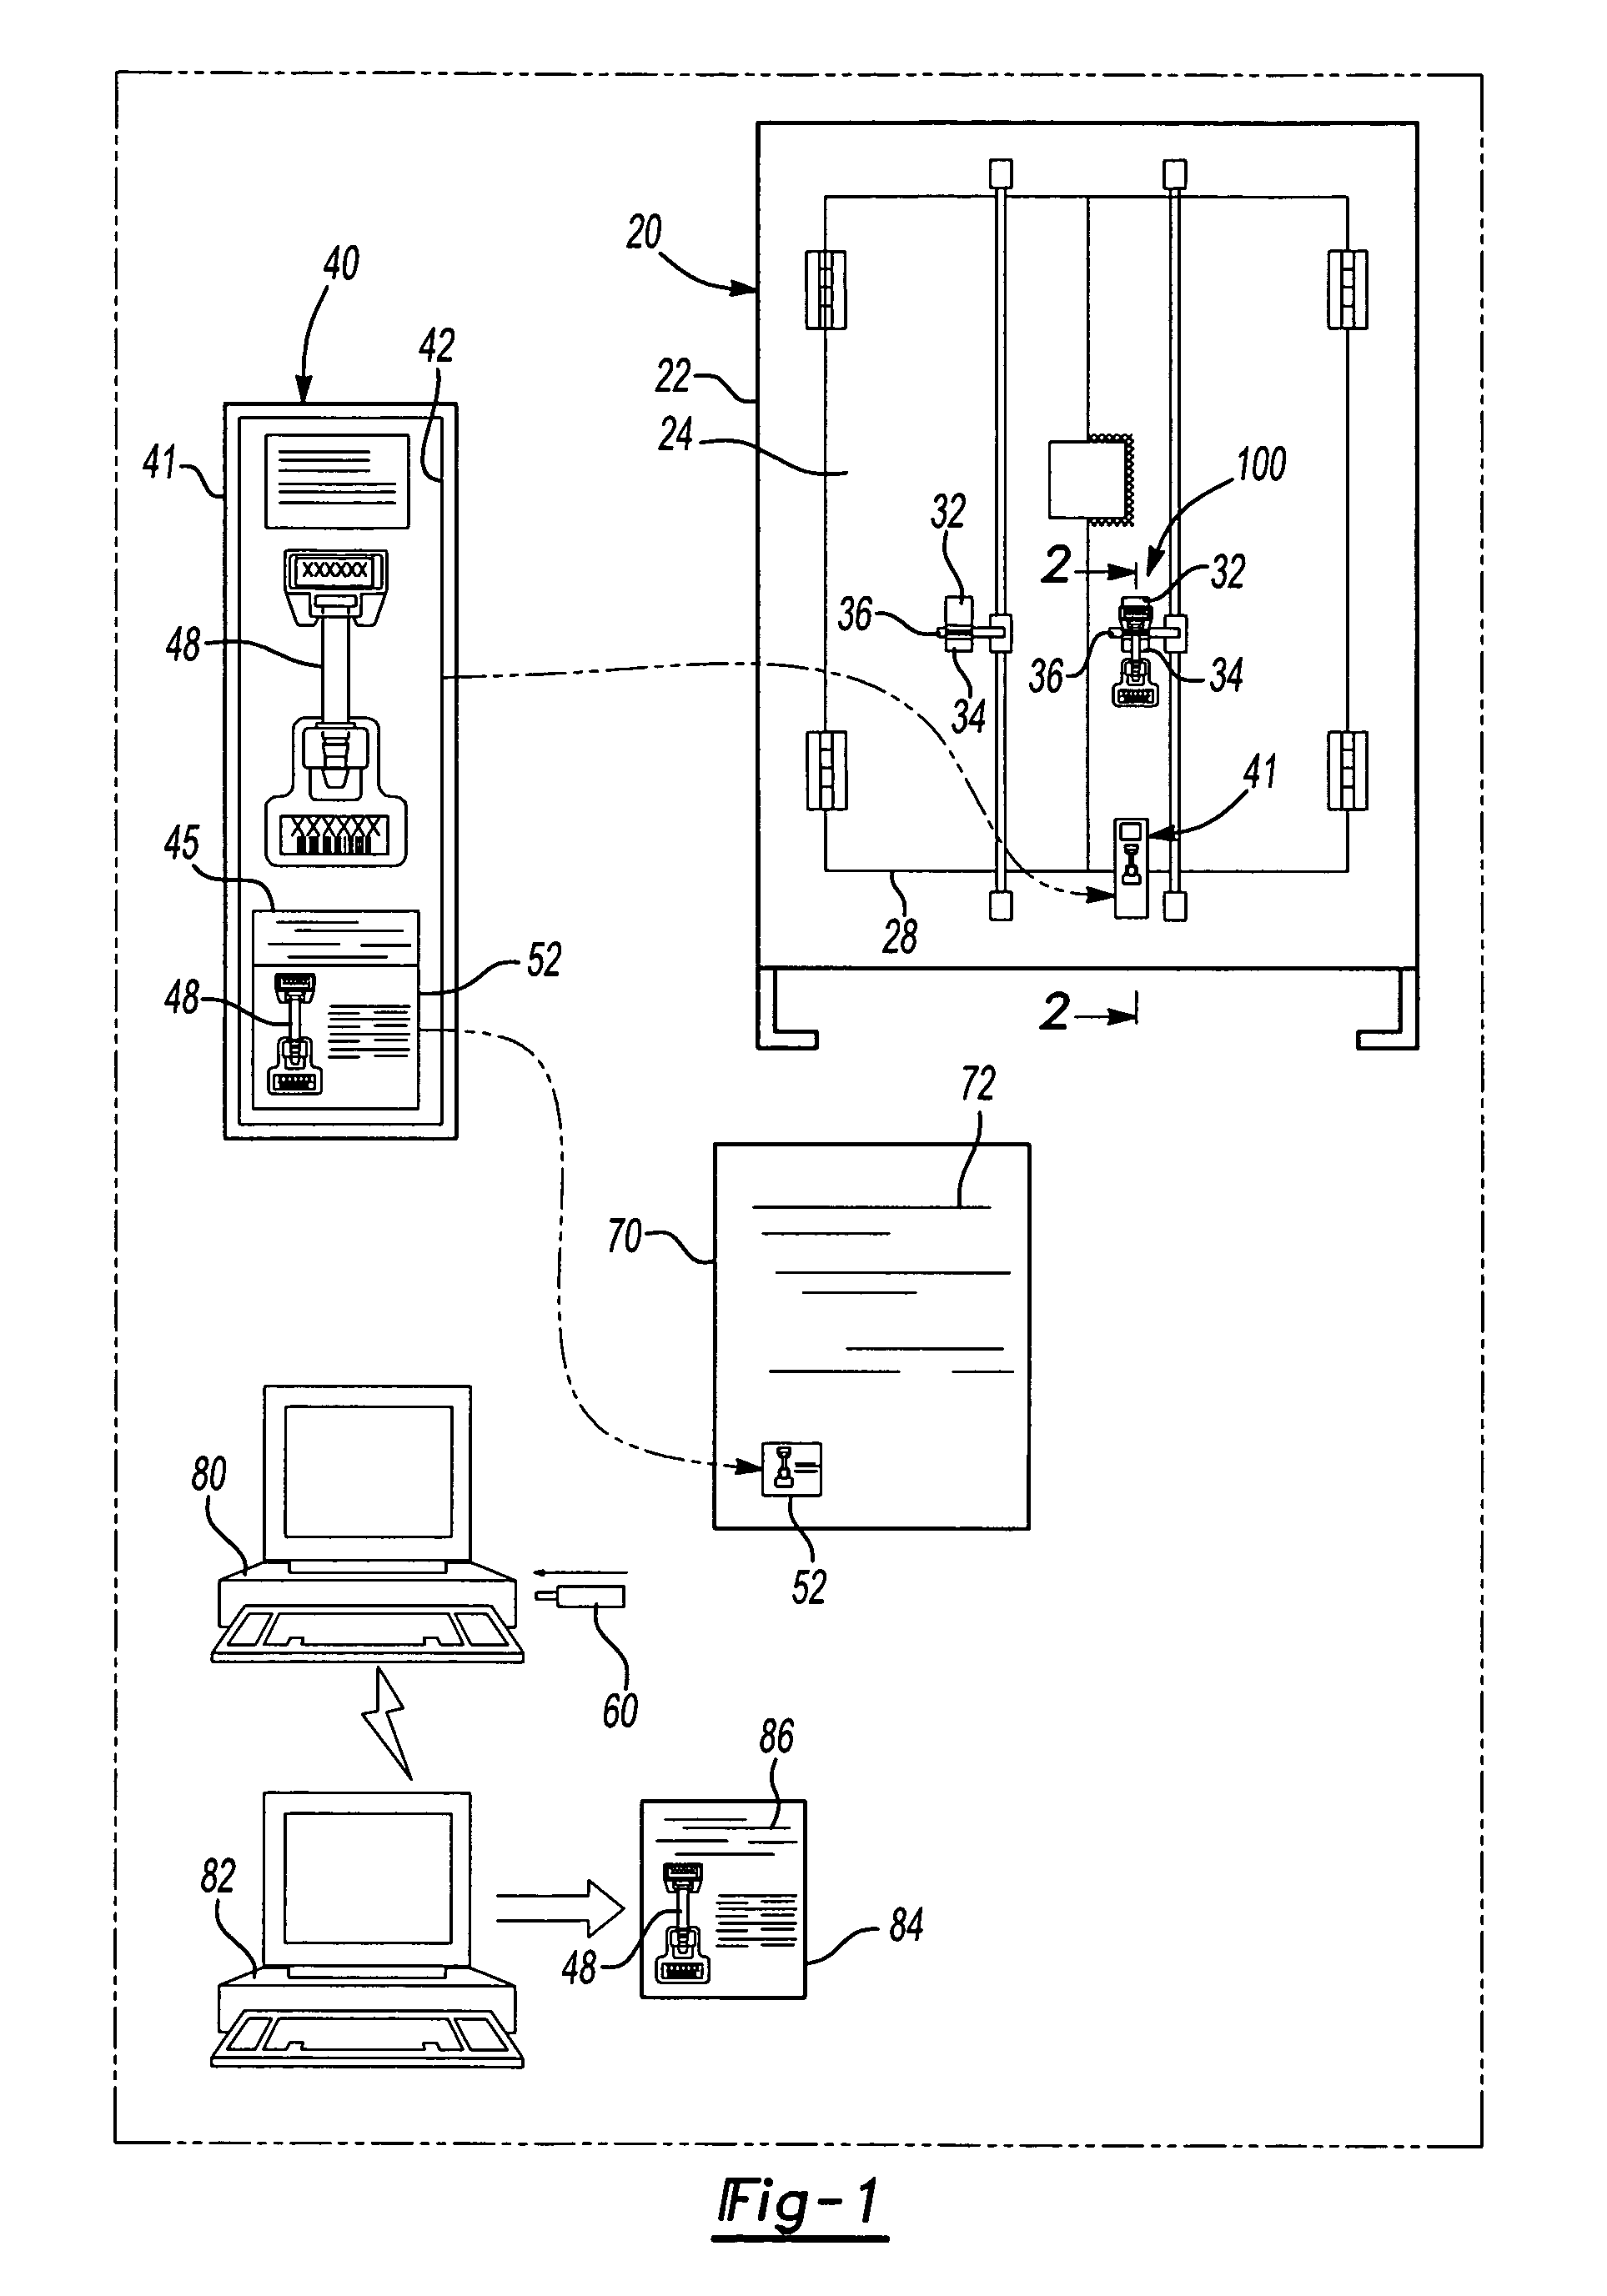 Mechanical tamper-evident high security seal and method of use to secure a cargo container